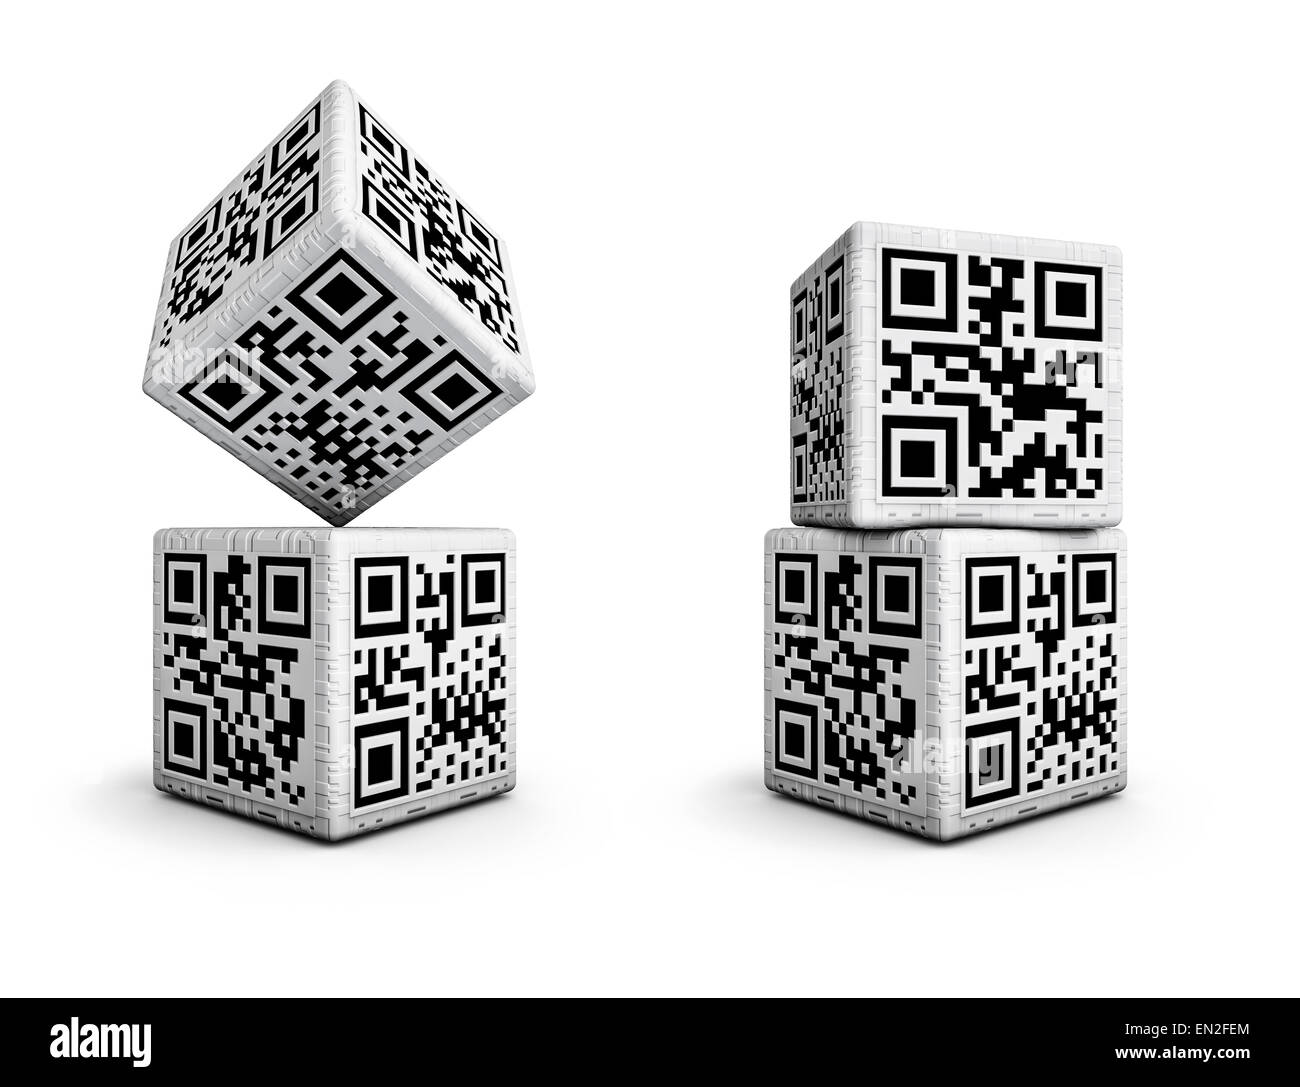 3D render of dice with qr codes for numbers 1 through 6 on sides Stock Photo